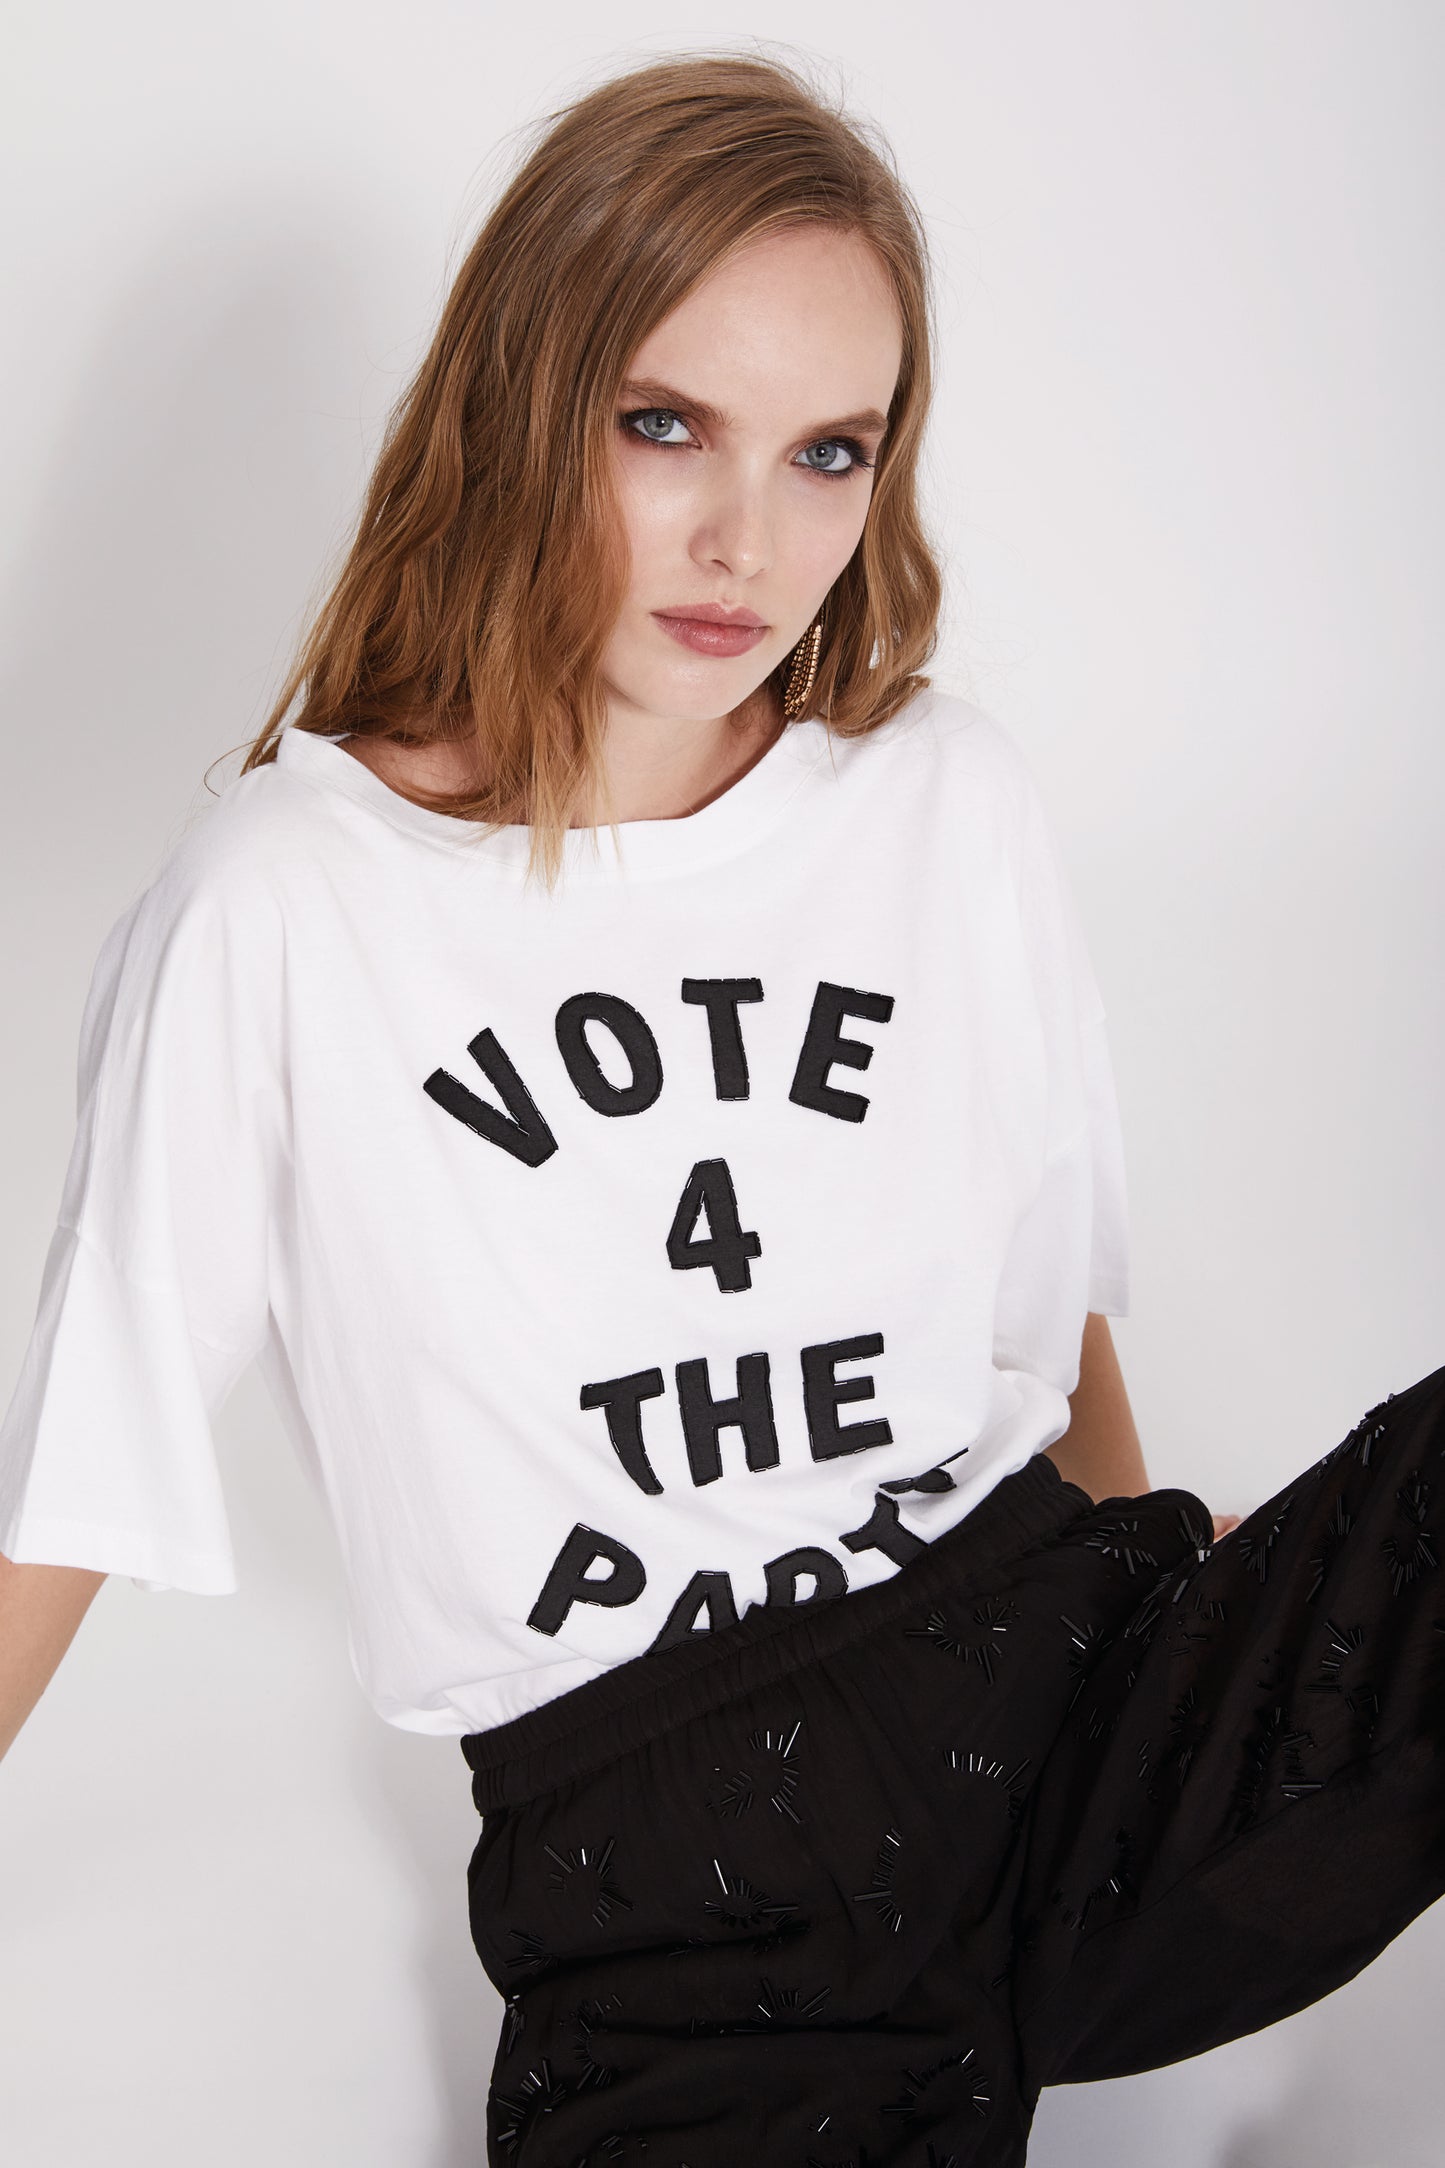 VOTE 4 THE PARTY T-SHIRT - WHITE